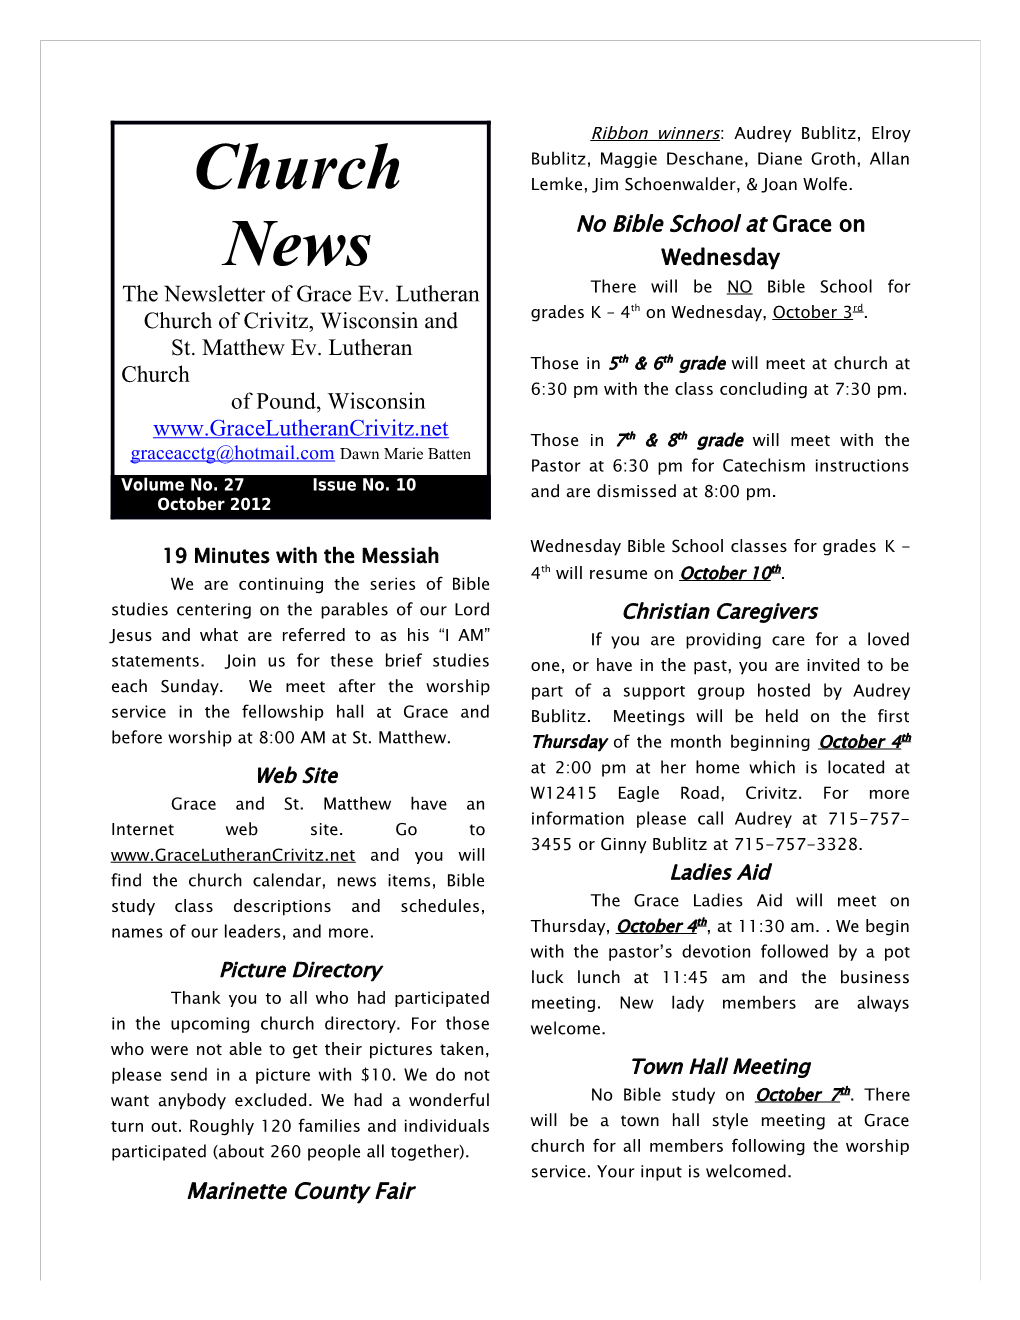 The Newsletter of Grace Ev.Lutheran Church of Crivitz, Wisconsin And